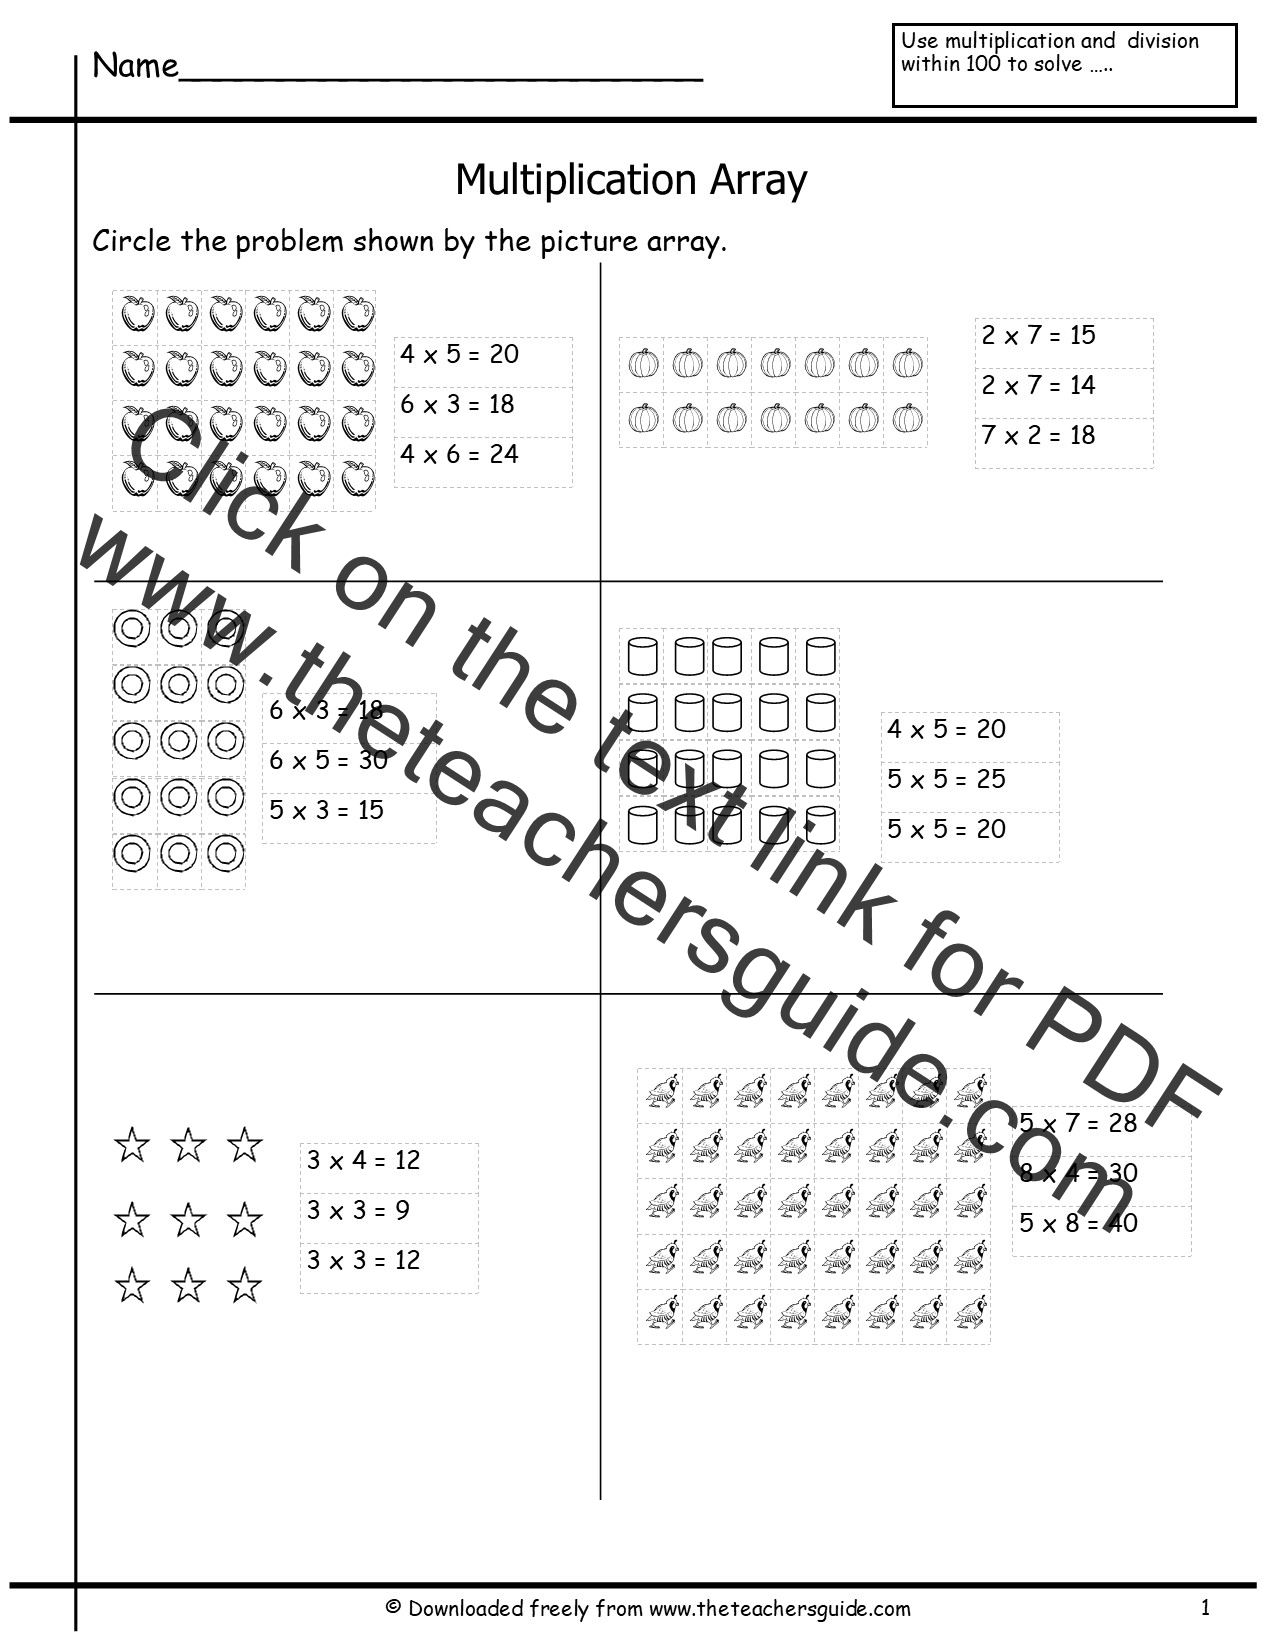 search-results-for-multiplication-array-worksheets-3rd-grade-calendar-2015